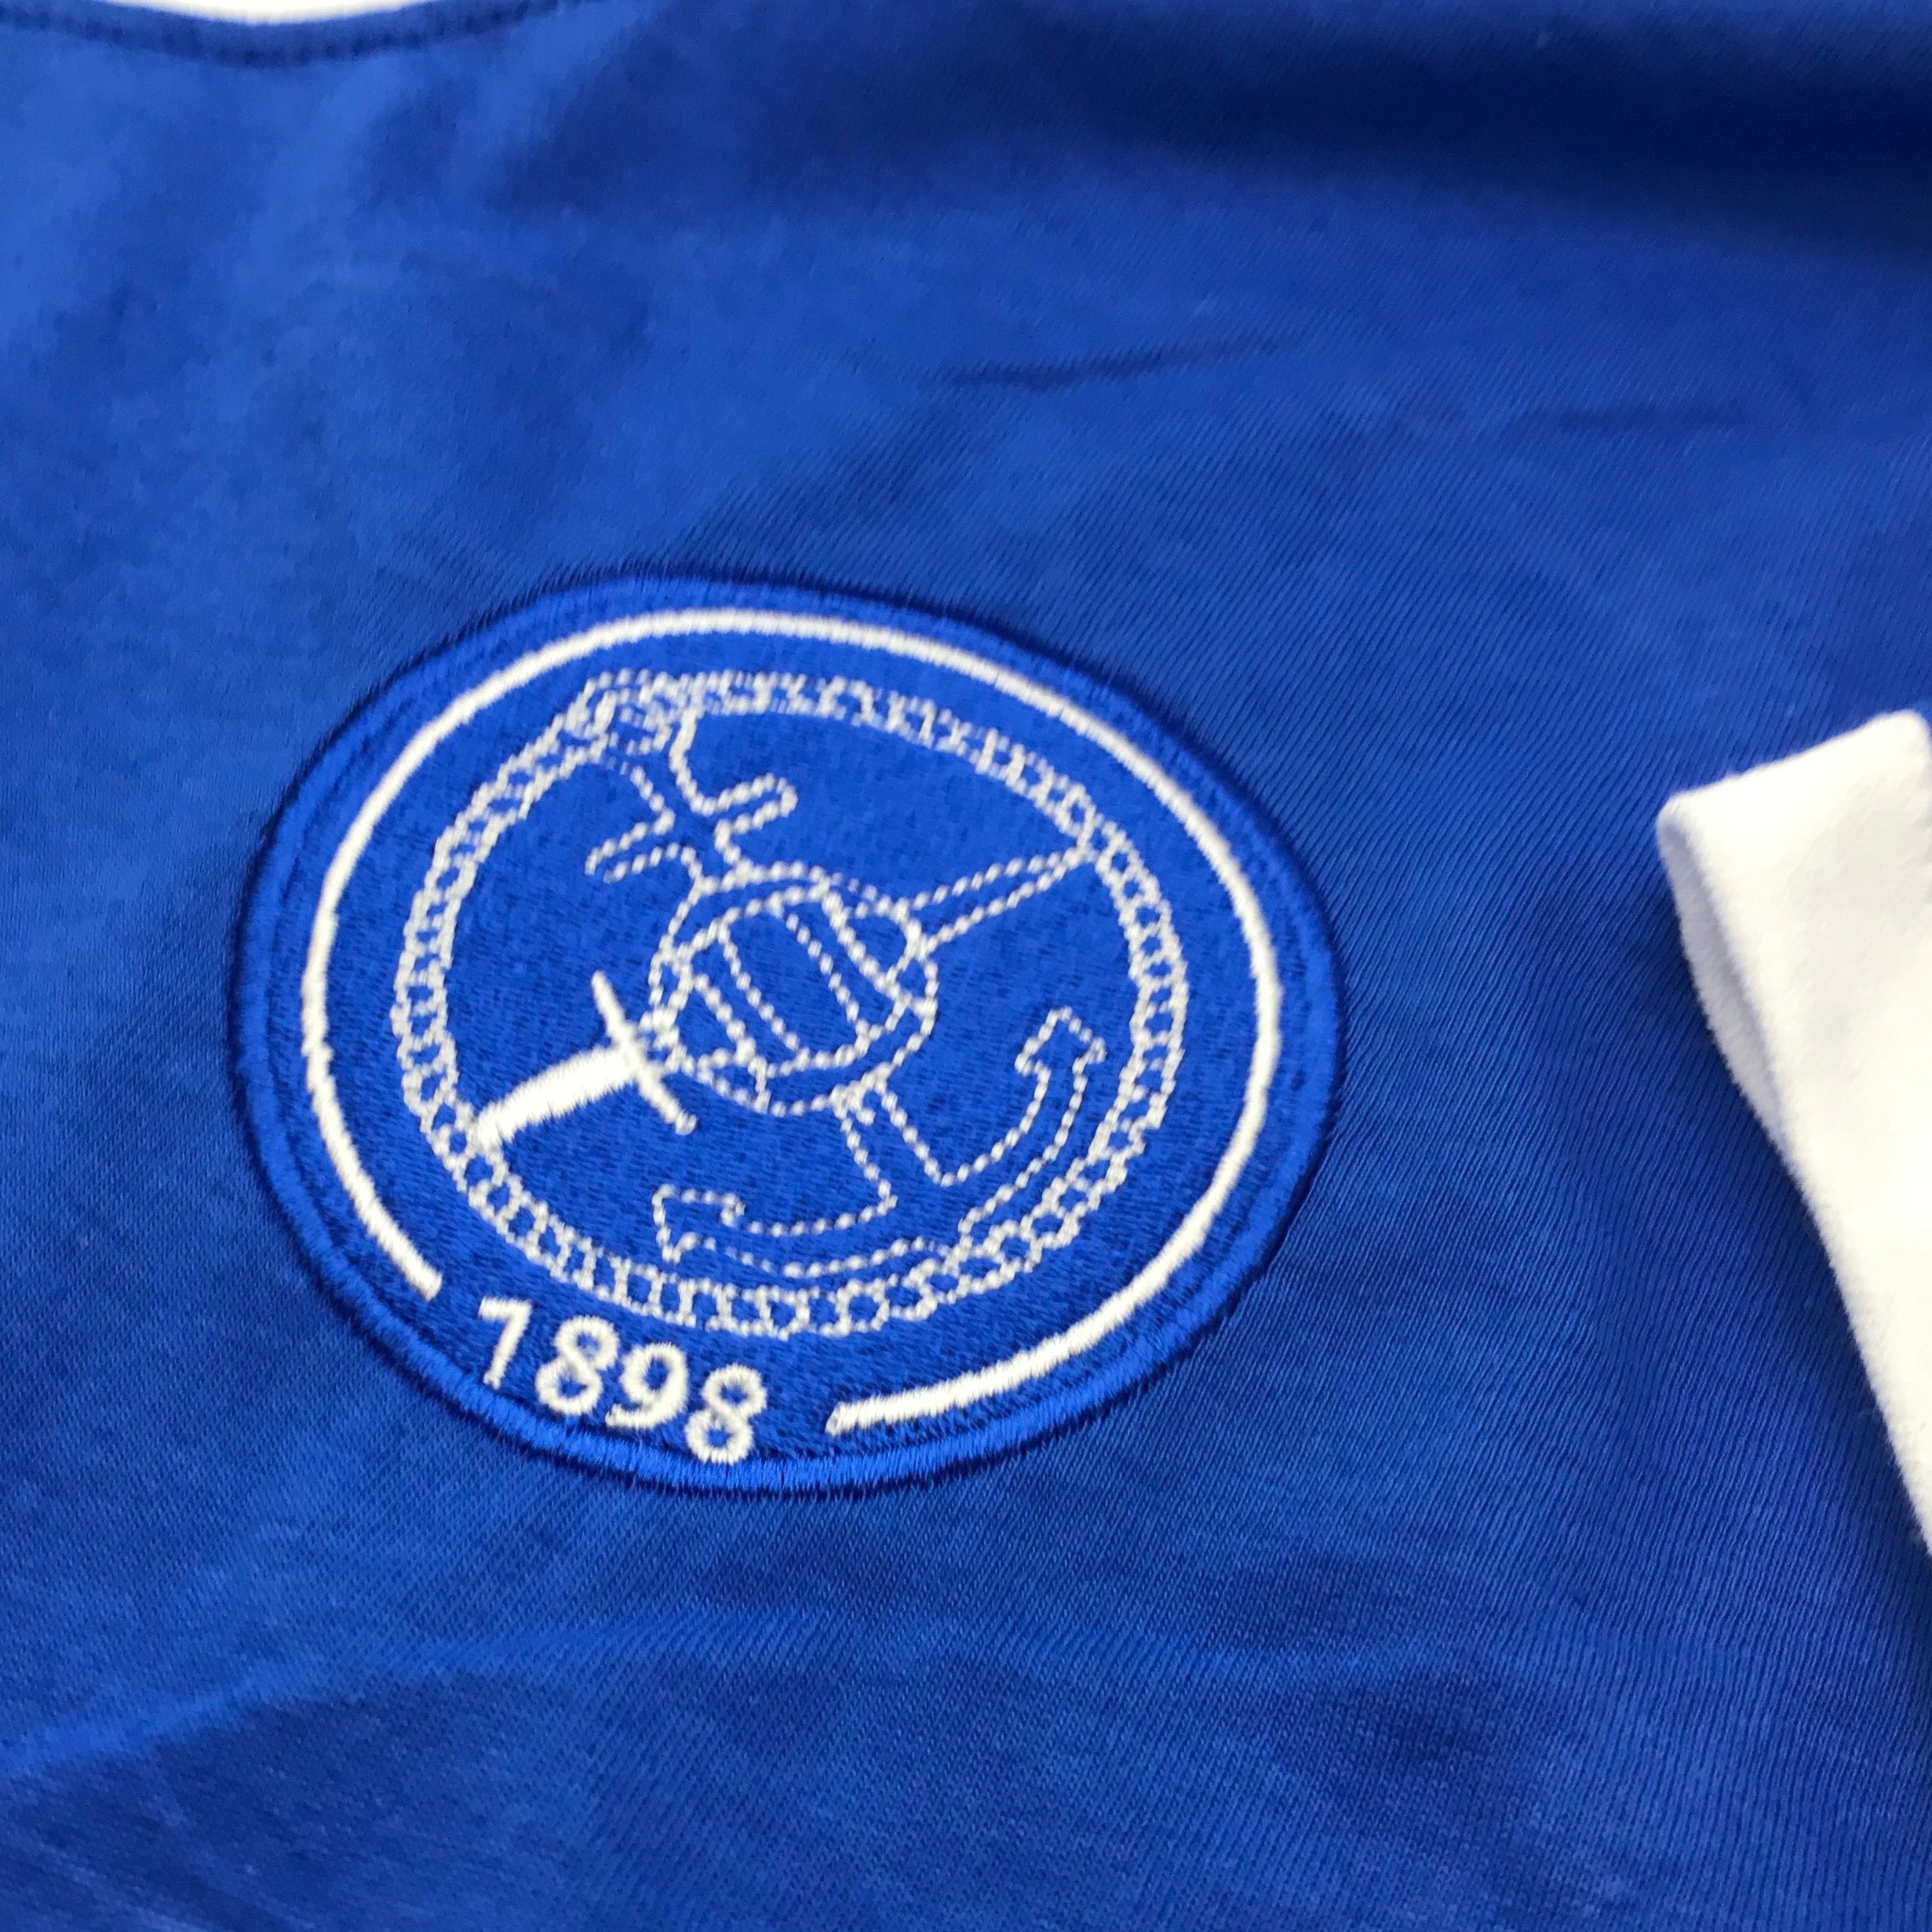 Retro Portsmouth Football Shirt | Classic Portsmouth Clothing for Sale ...